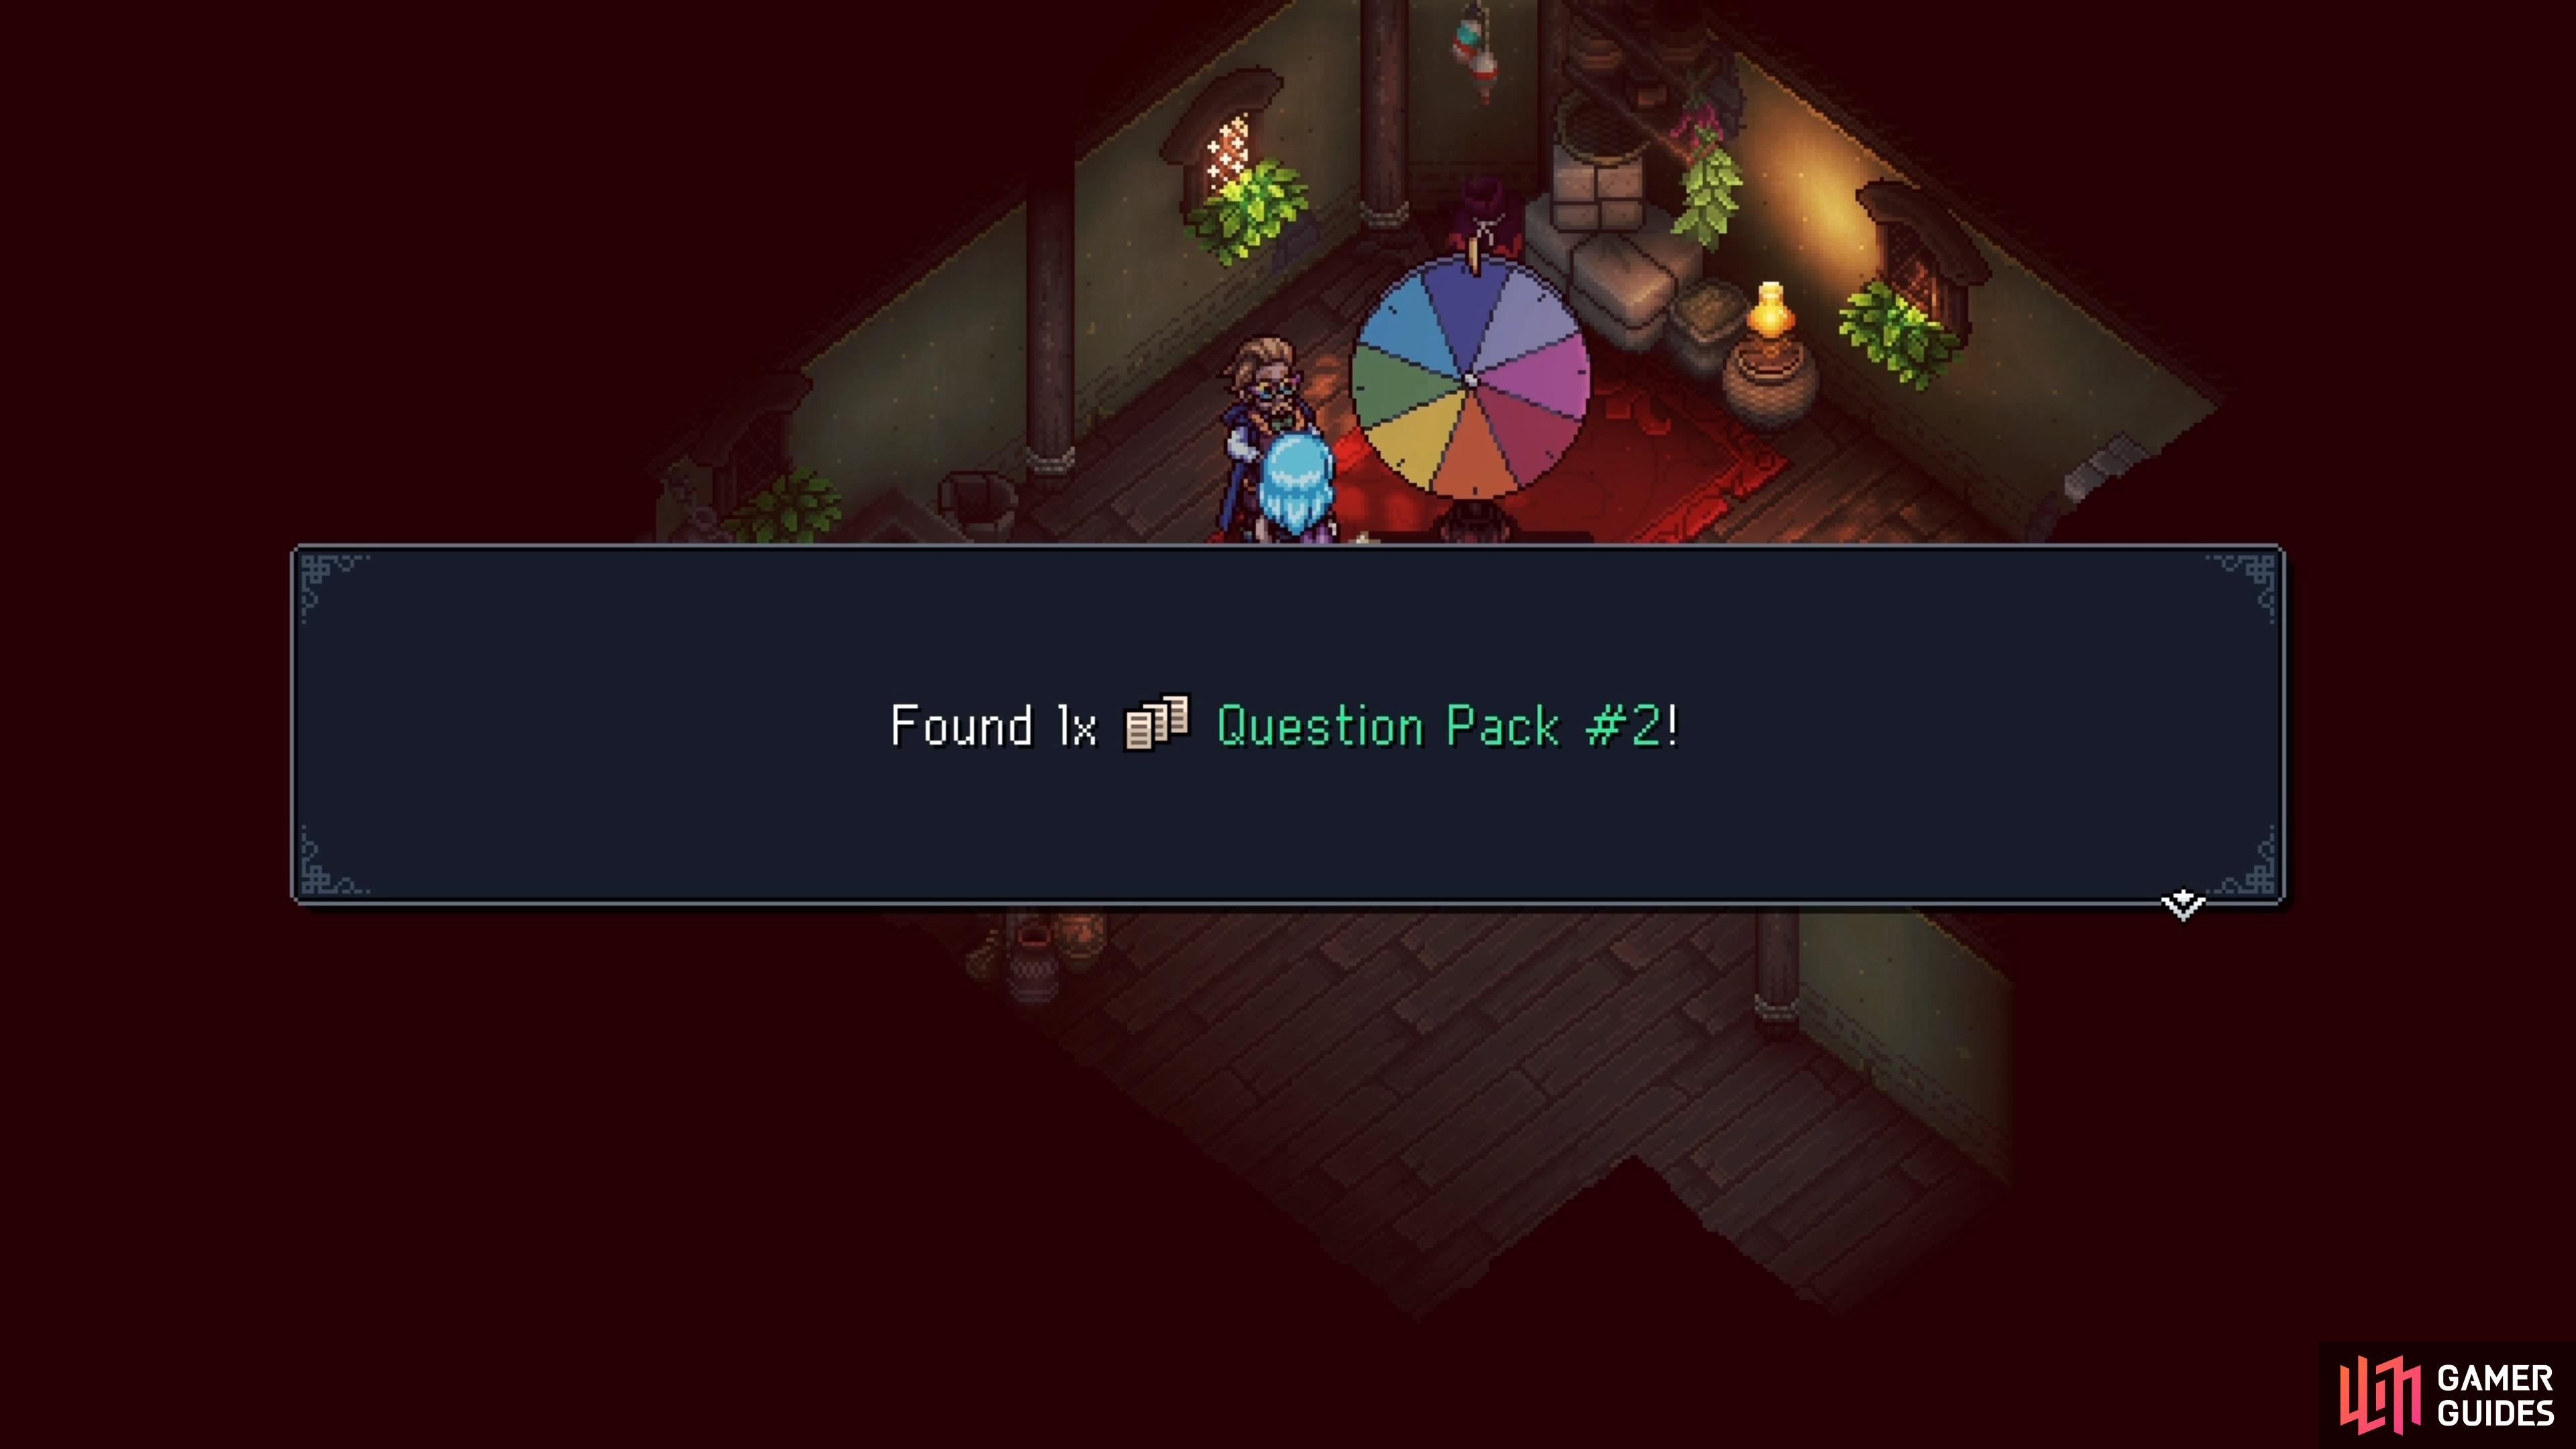 Keep an eye out for the Question Packs on your journey.